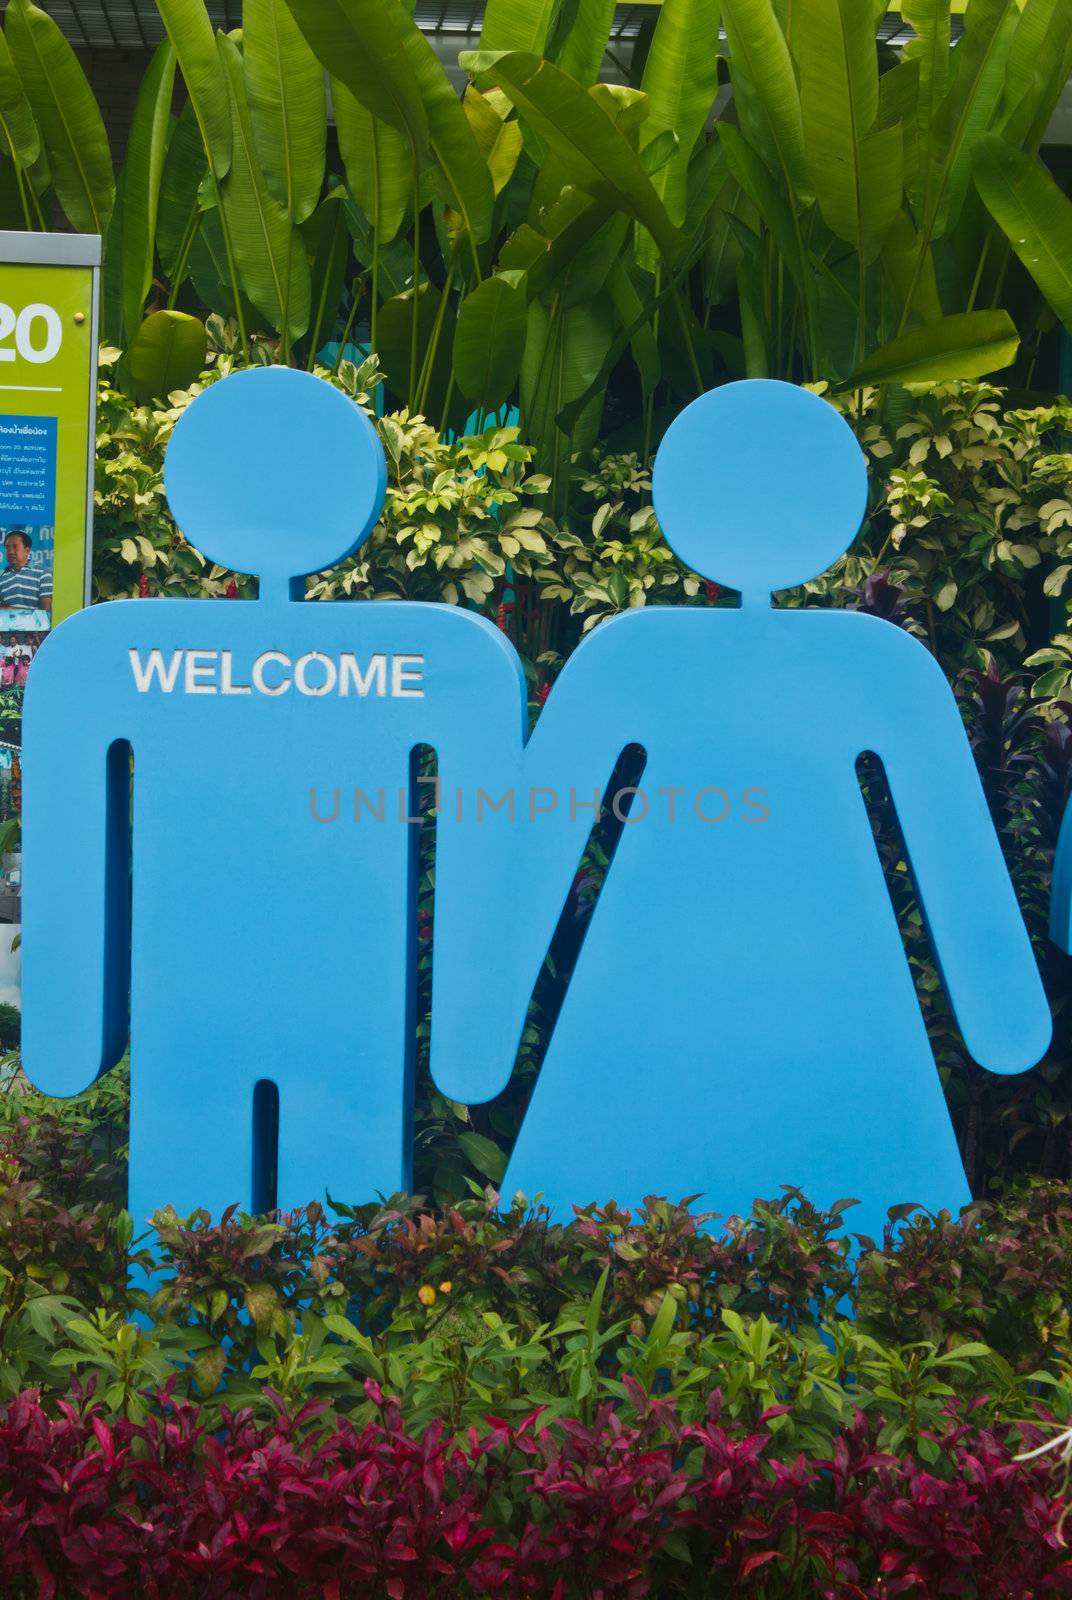 Stock Photo - Male and female Toilet sign